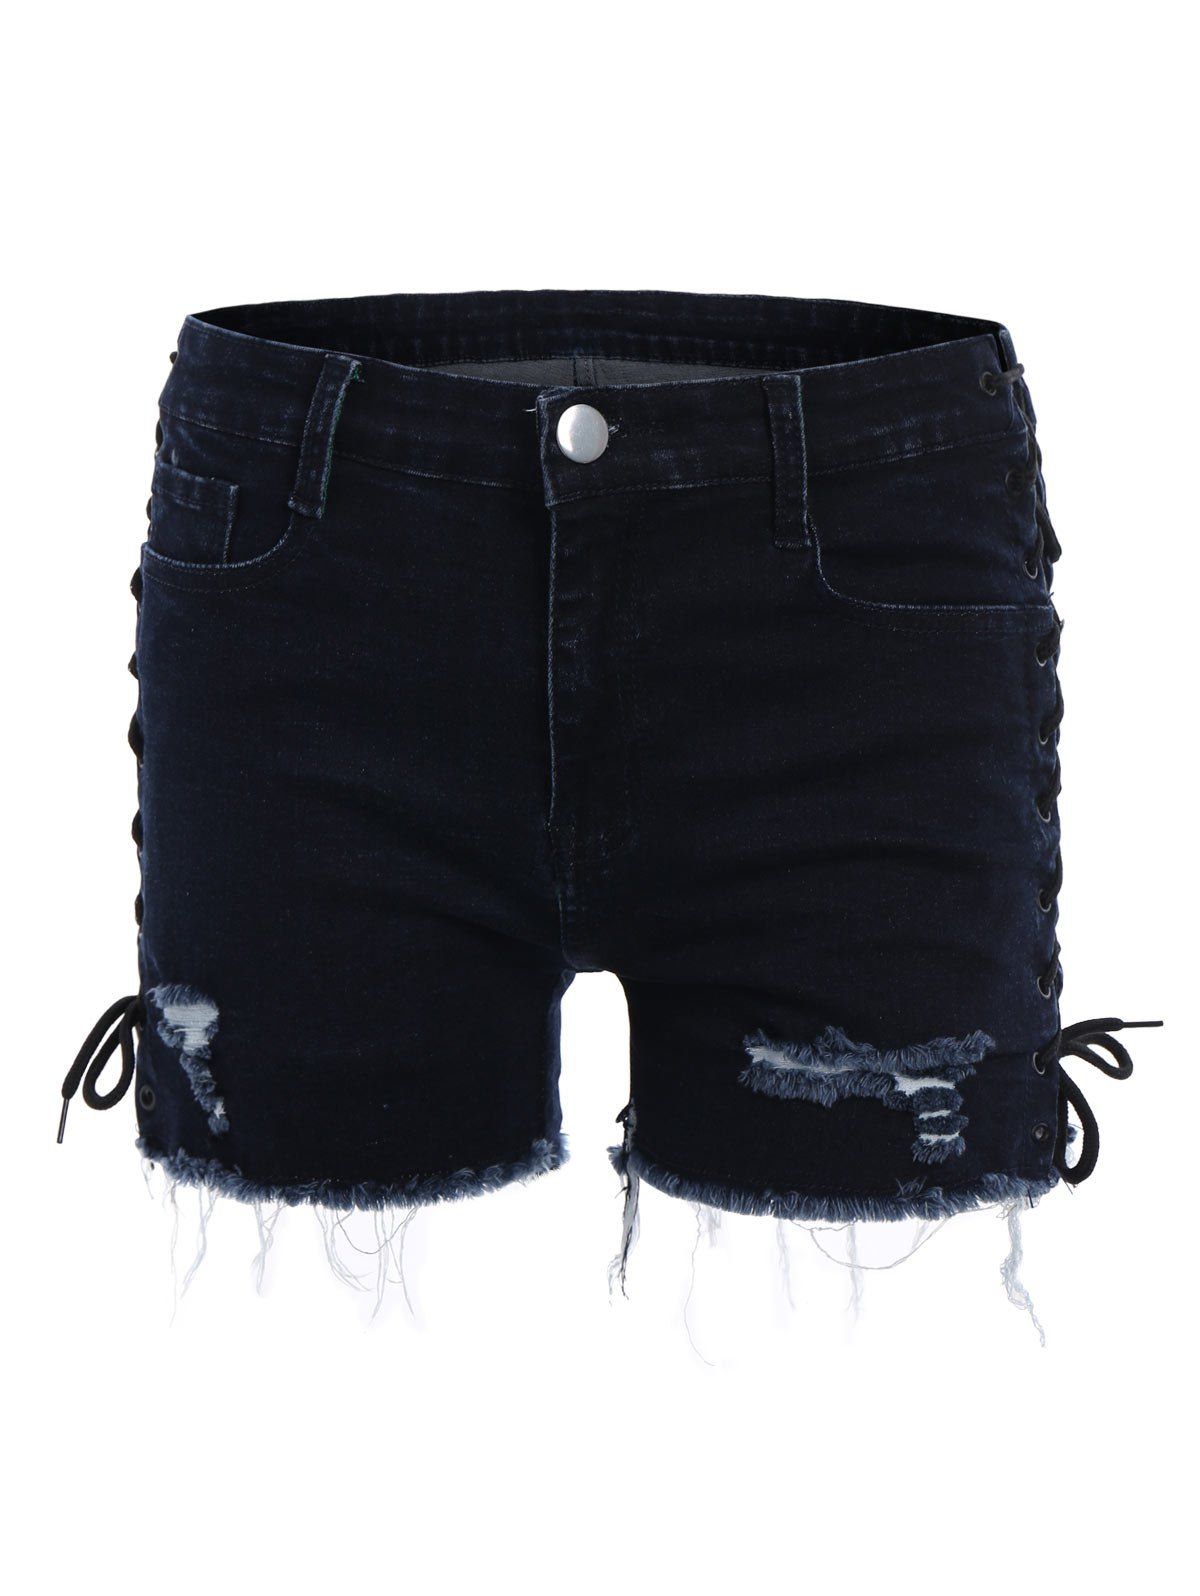 [17% OFF] 2021 Ripped Jean Shorts With Lace Up In PURPLISH BLUE | DressLily